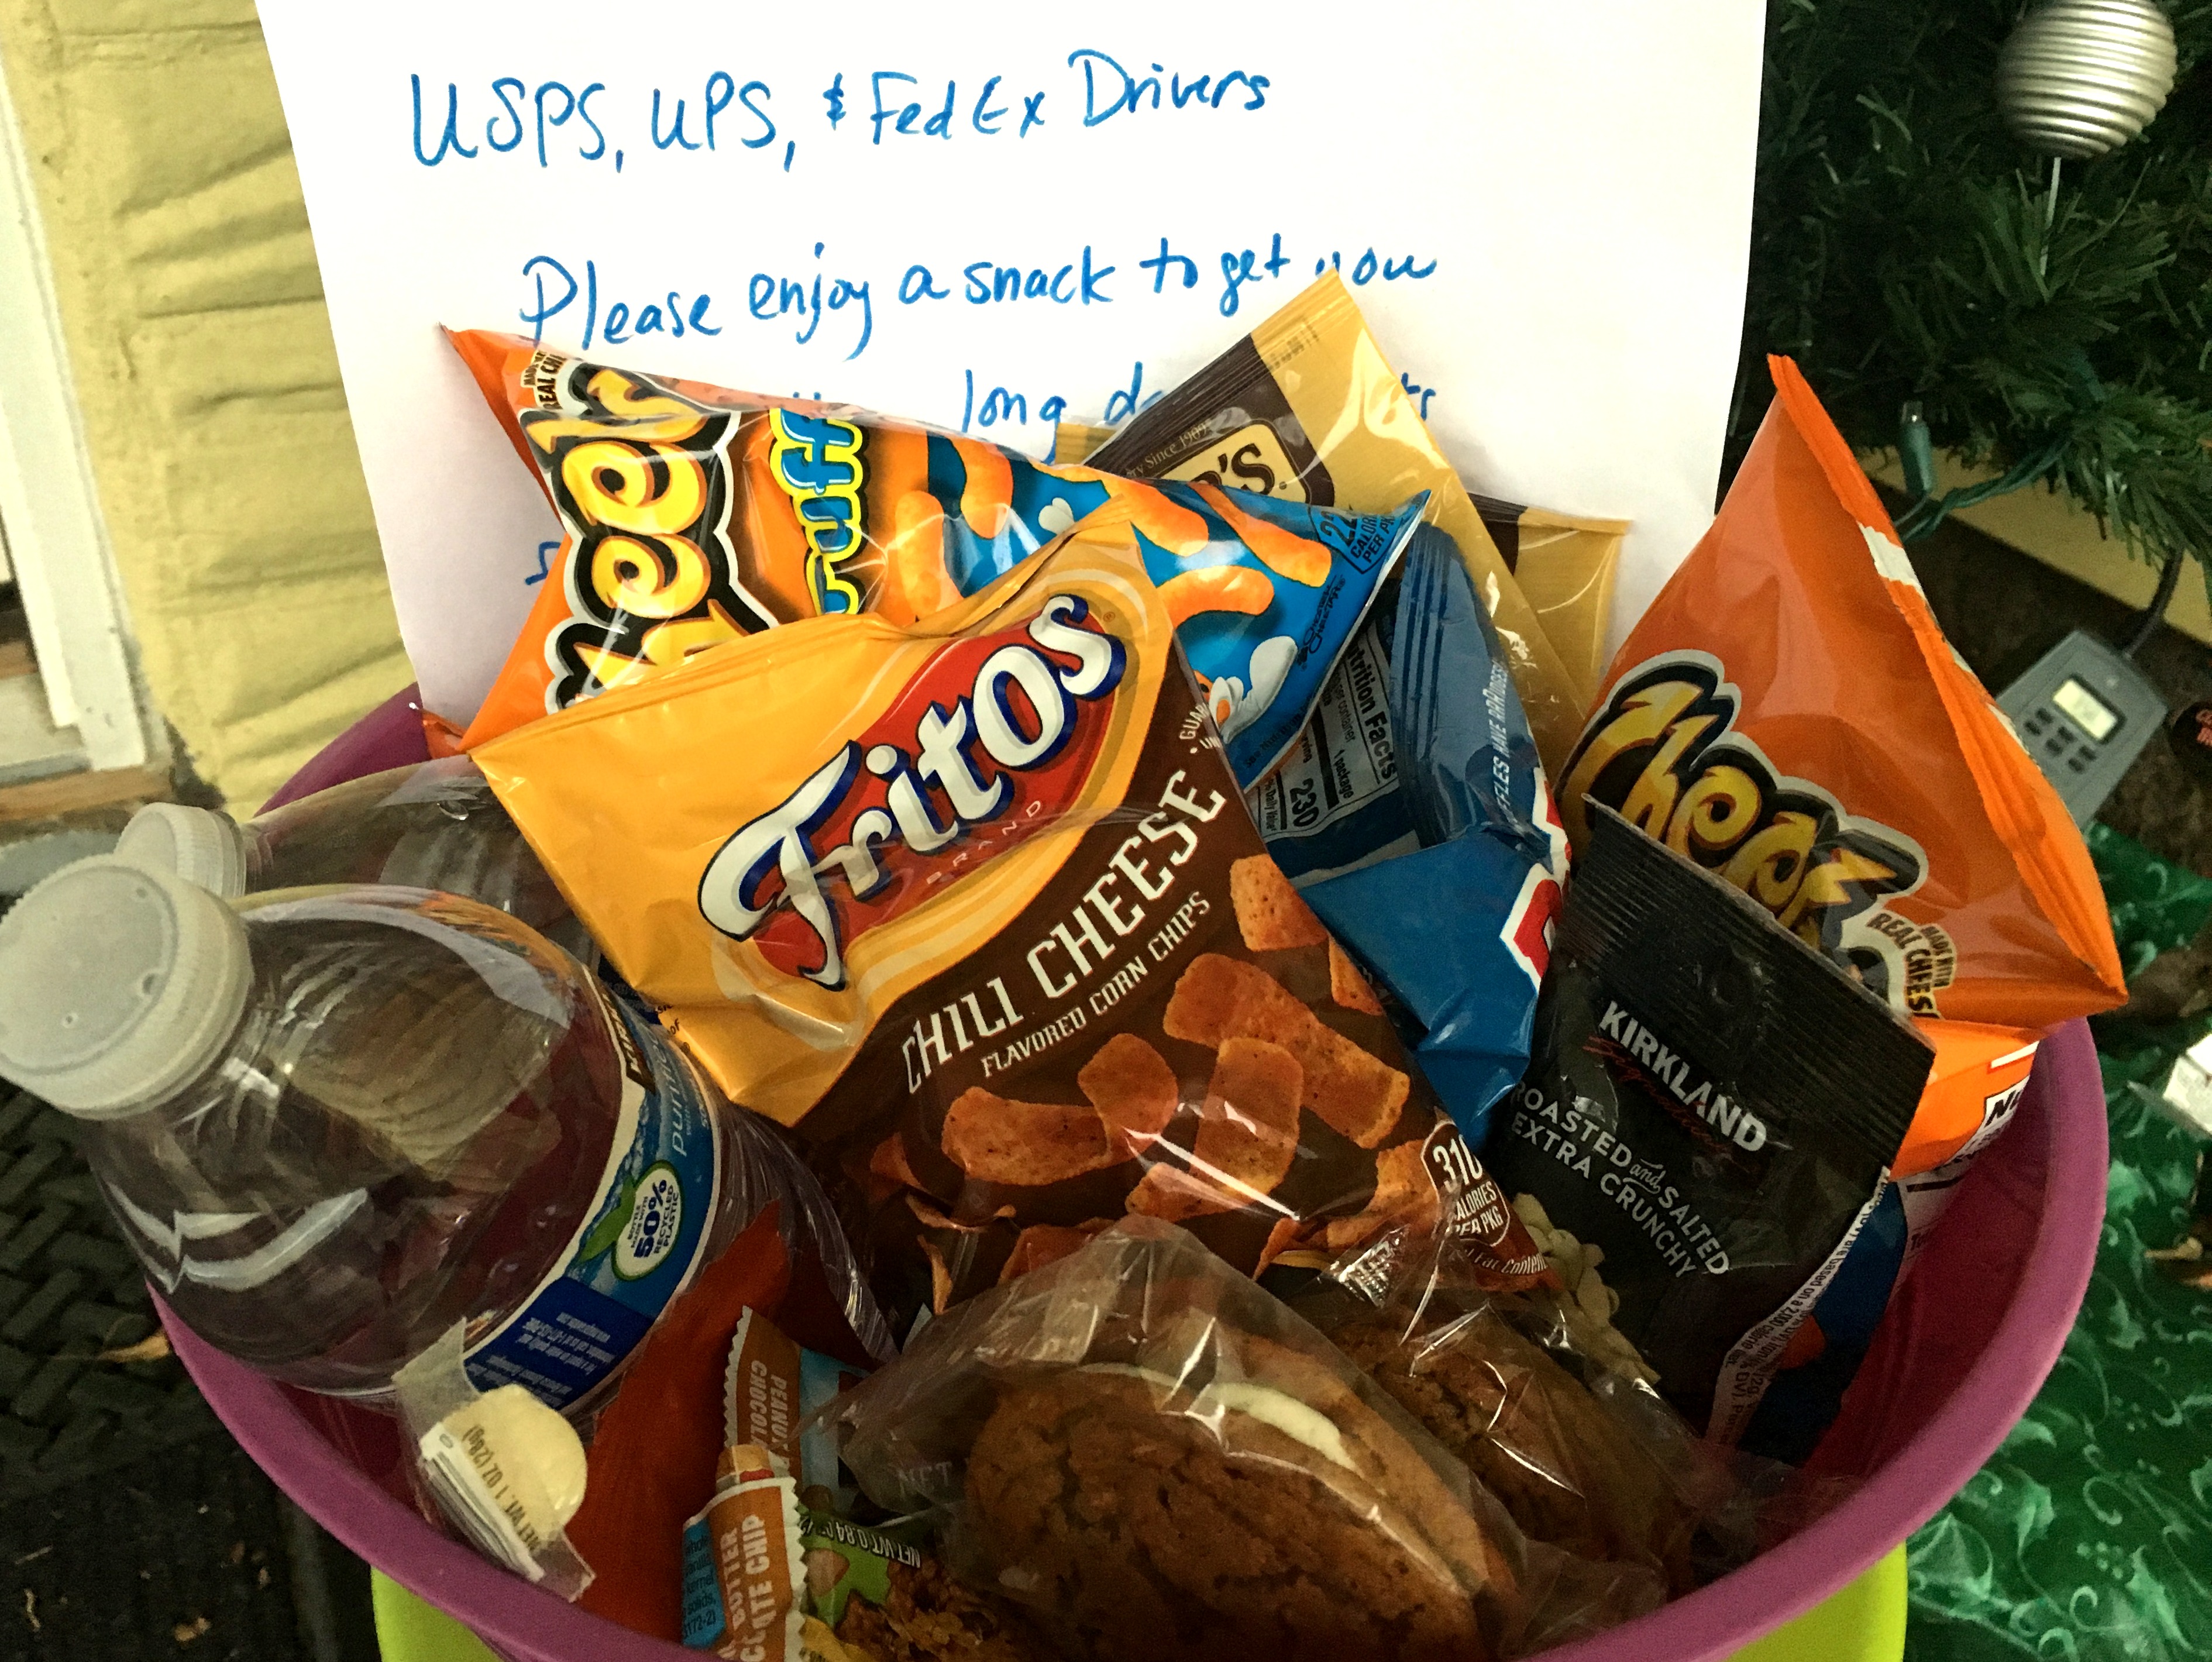 Snack basket and small gifts for mail carriers and delivery drivers